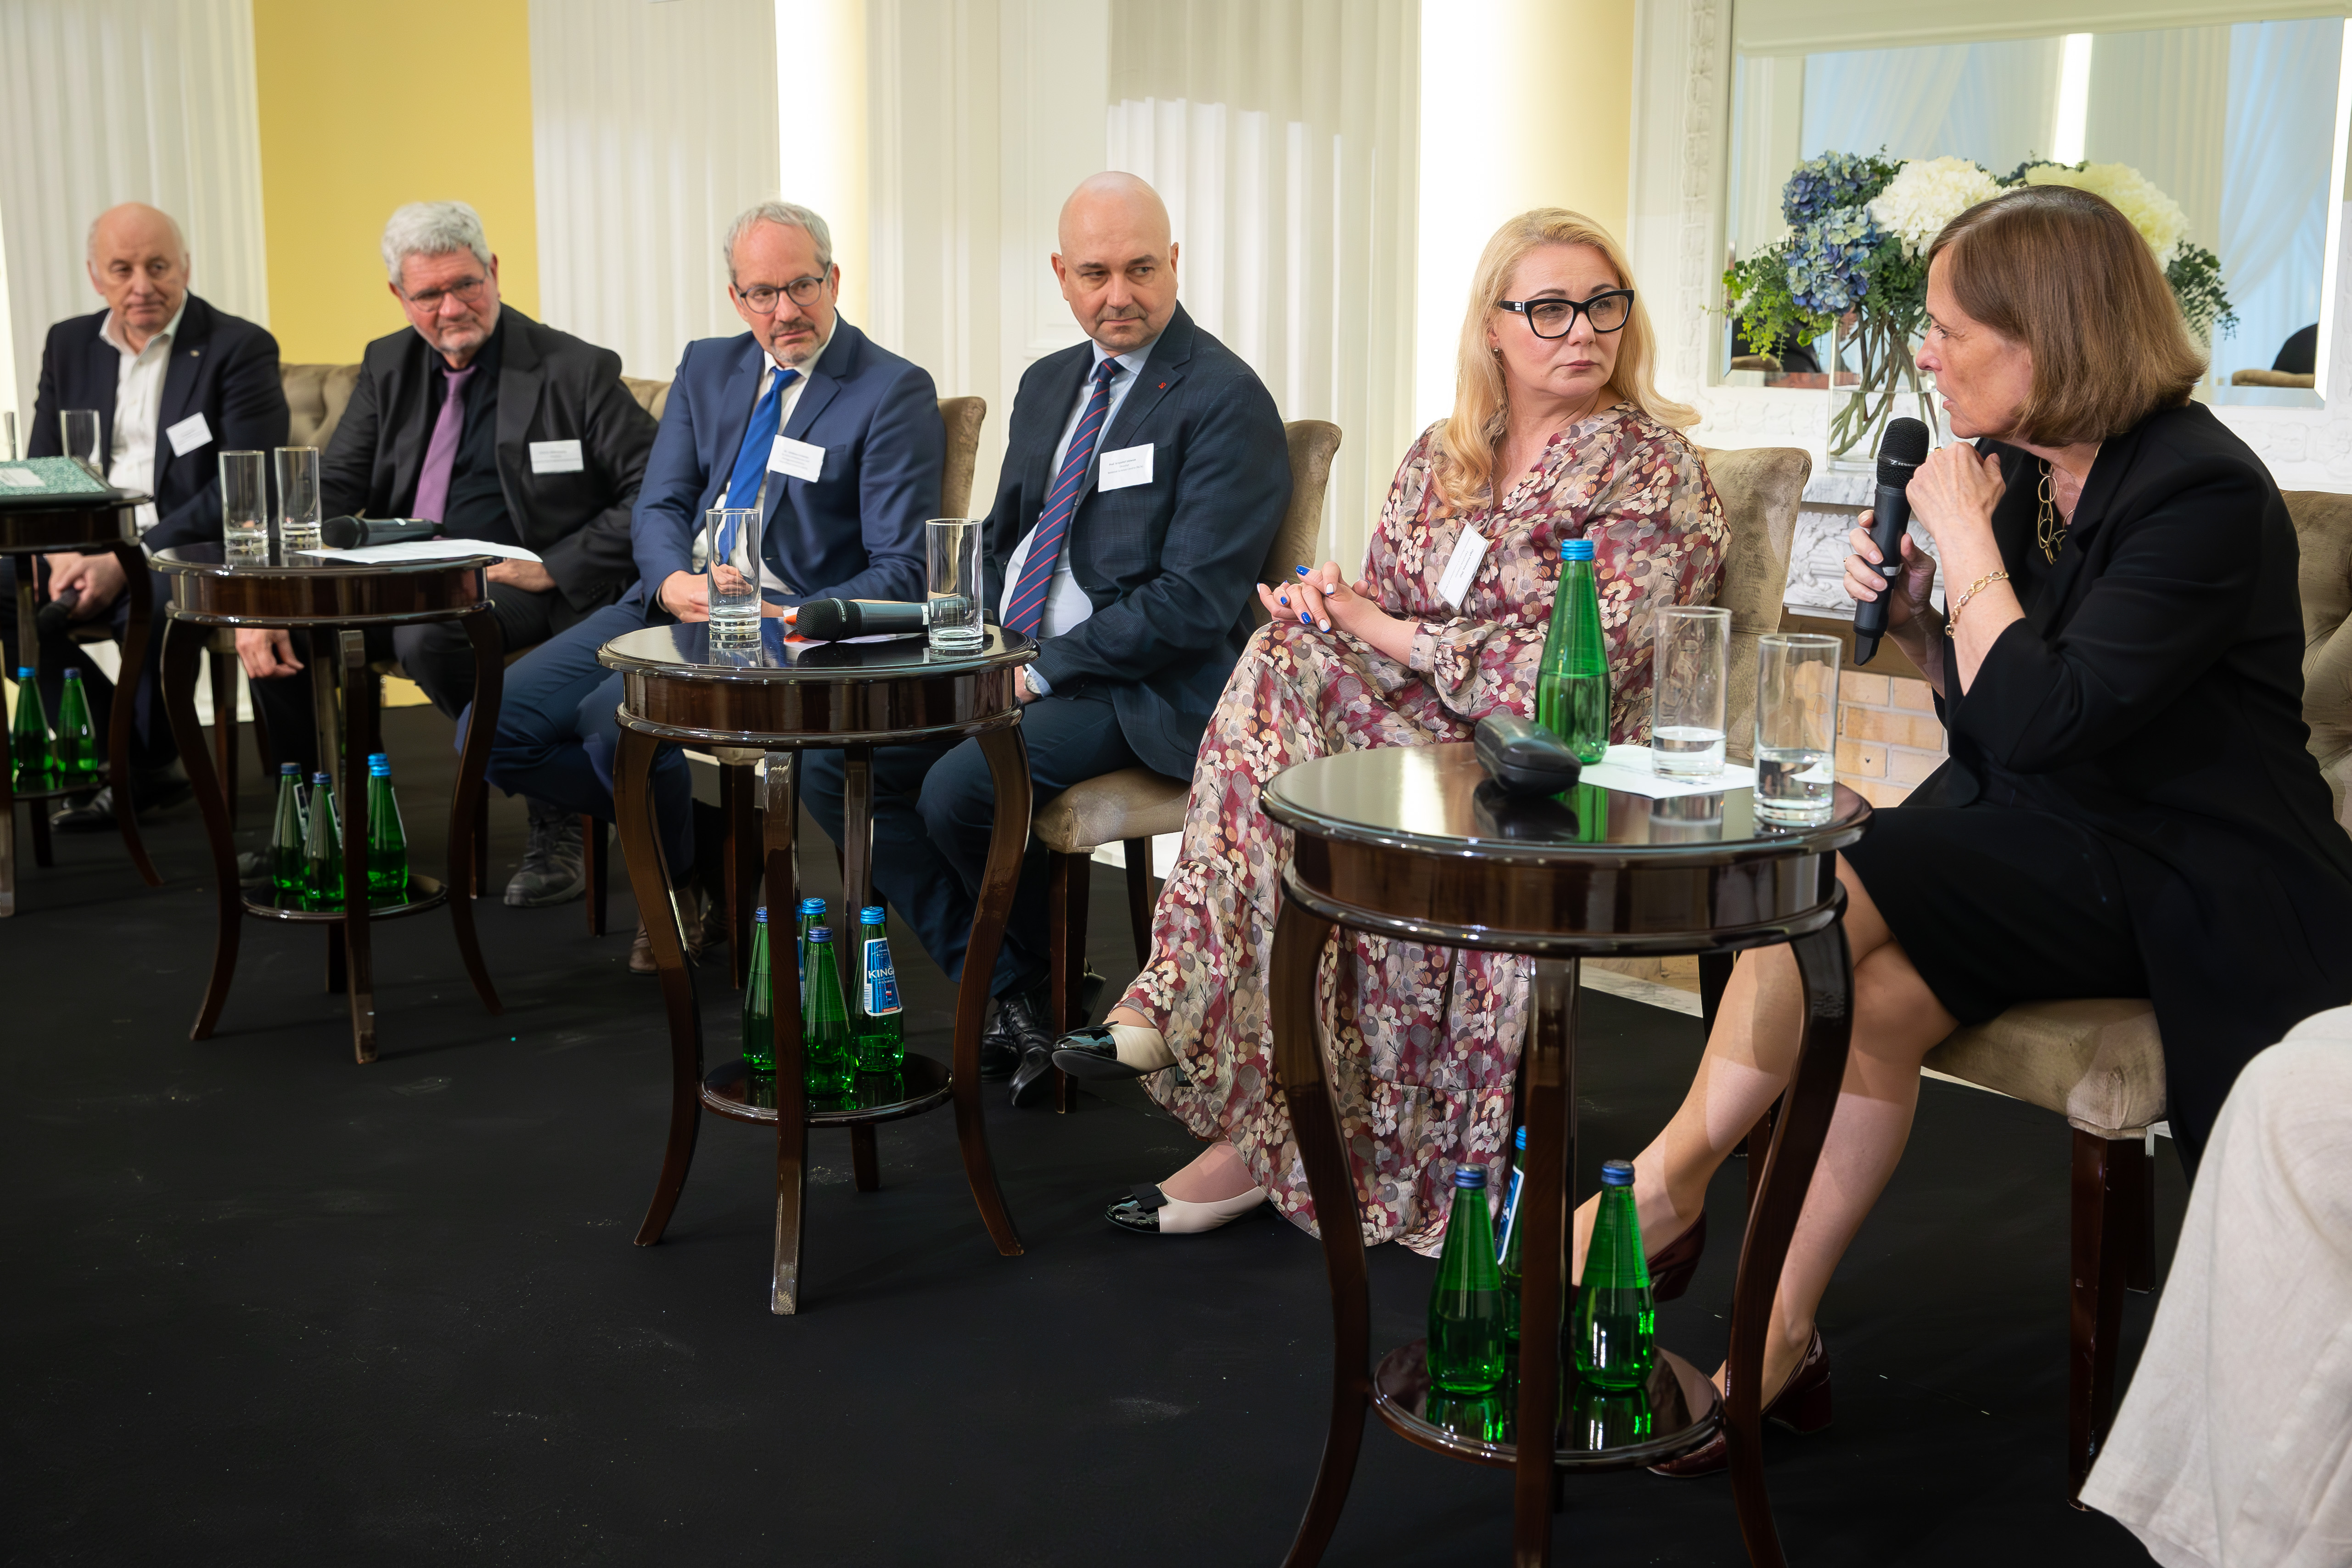 Impressions of the Fourth Polish-German Science Meeting: Lively panel discussion on support measures for Ukrainian research with Olga Polotska, Executive Director of the NRFU.